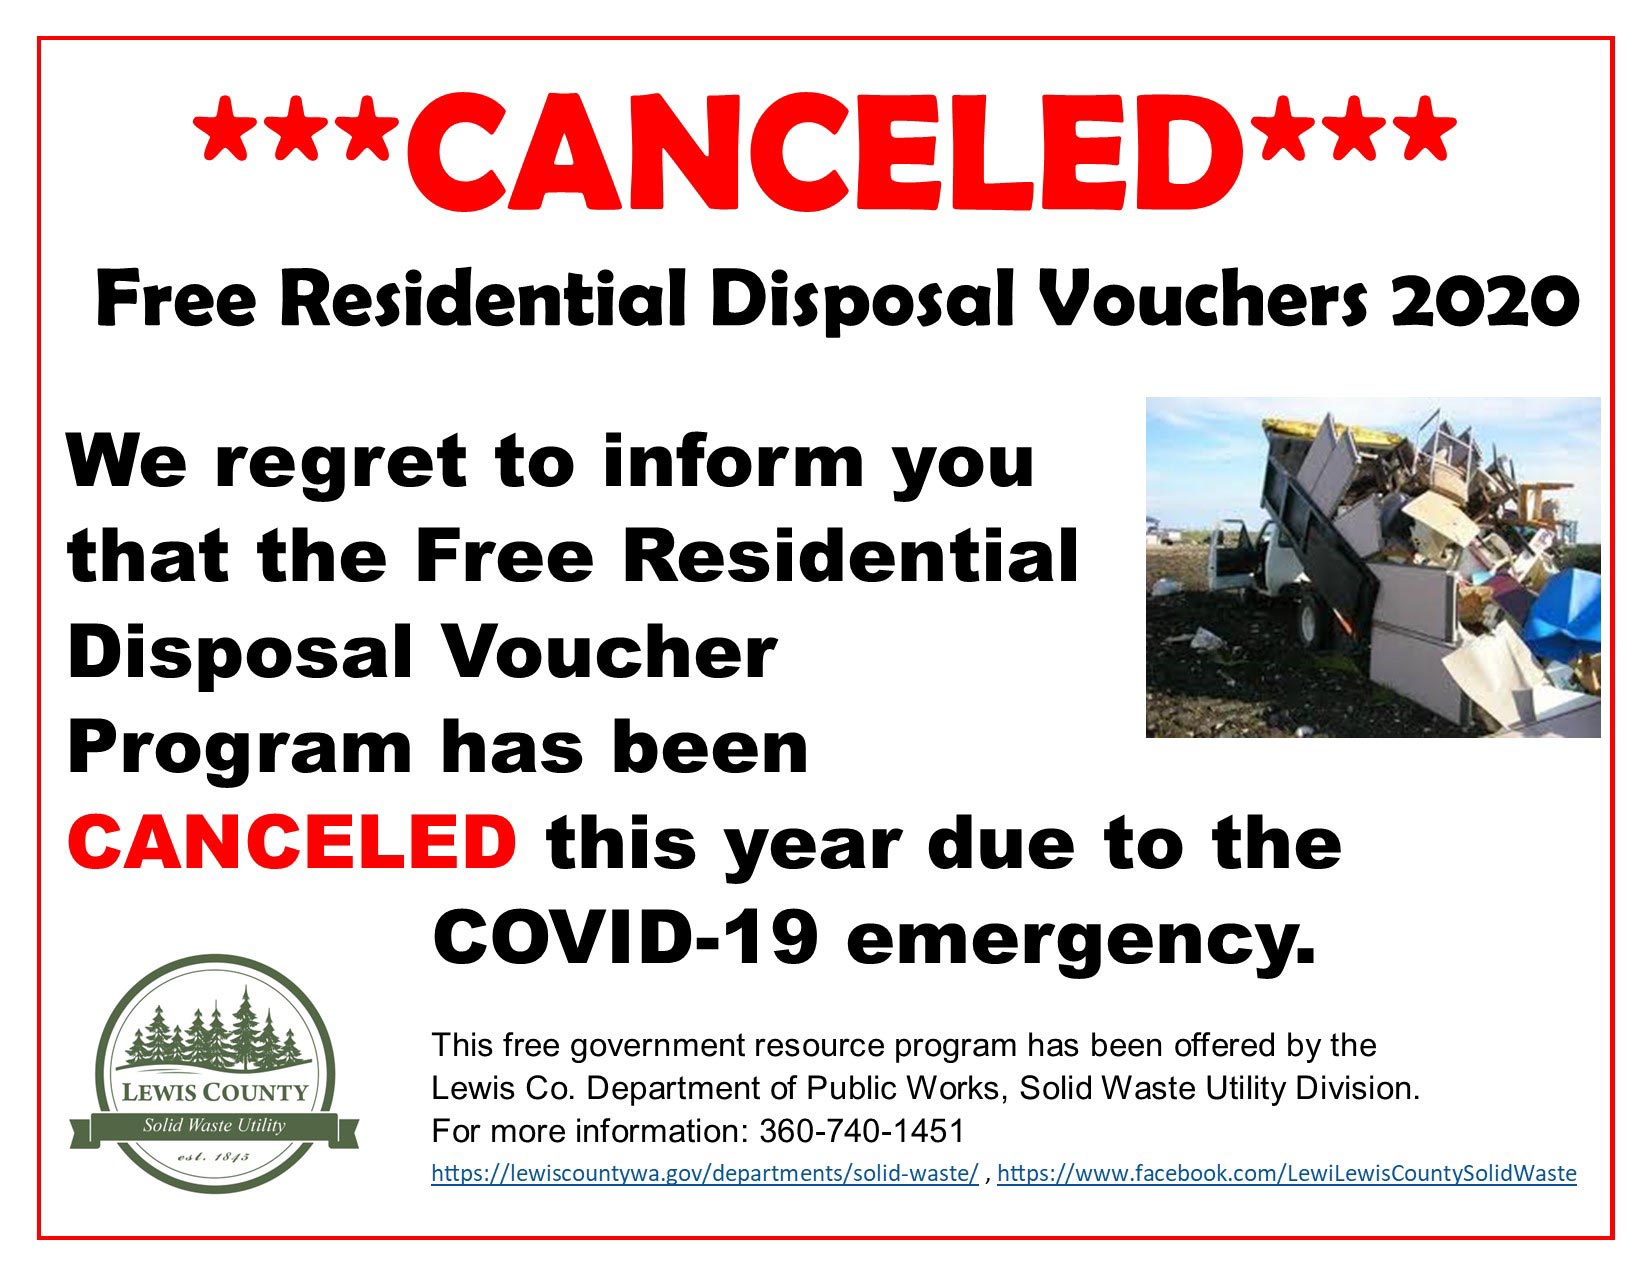 The expected start data of May 1, 2020 is delayed due to the COVID-19 emergency. Stay tuned! We will keep our website and social media sites updated with the latest information. This program is for residential customers only. Only one voucher per primary residence per year.